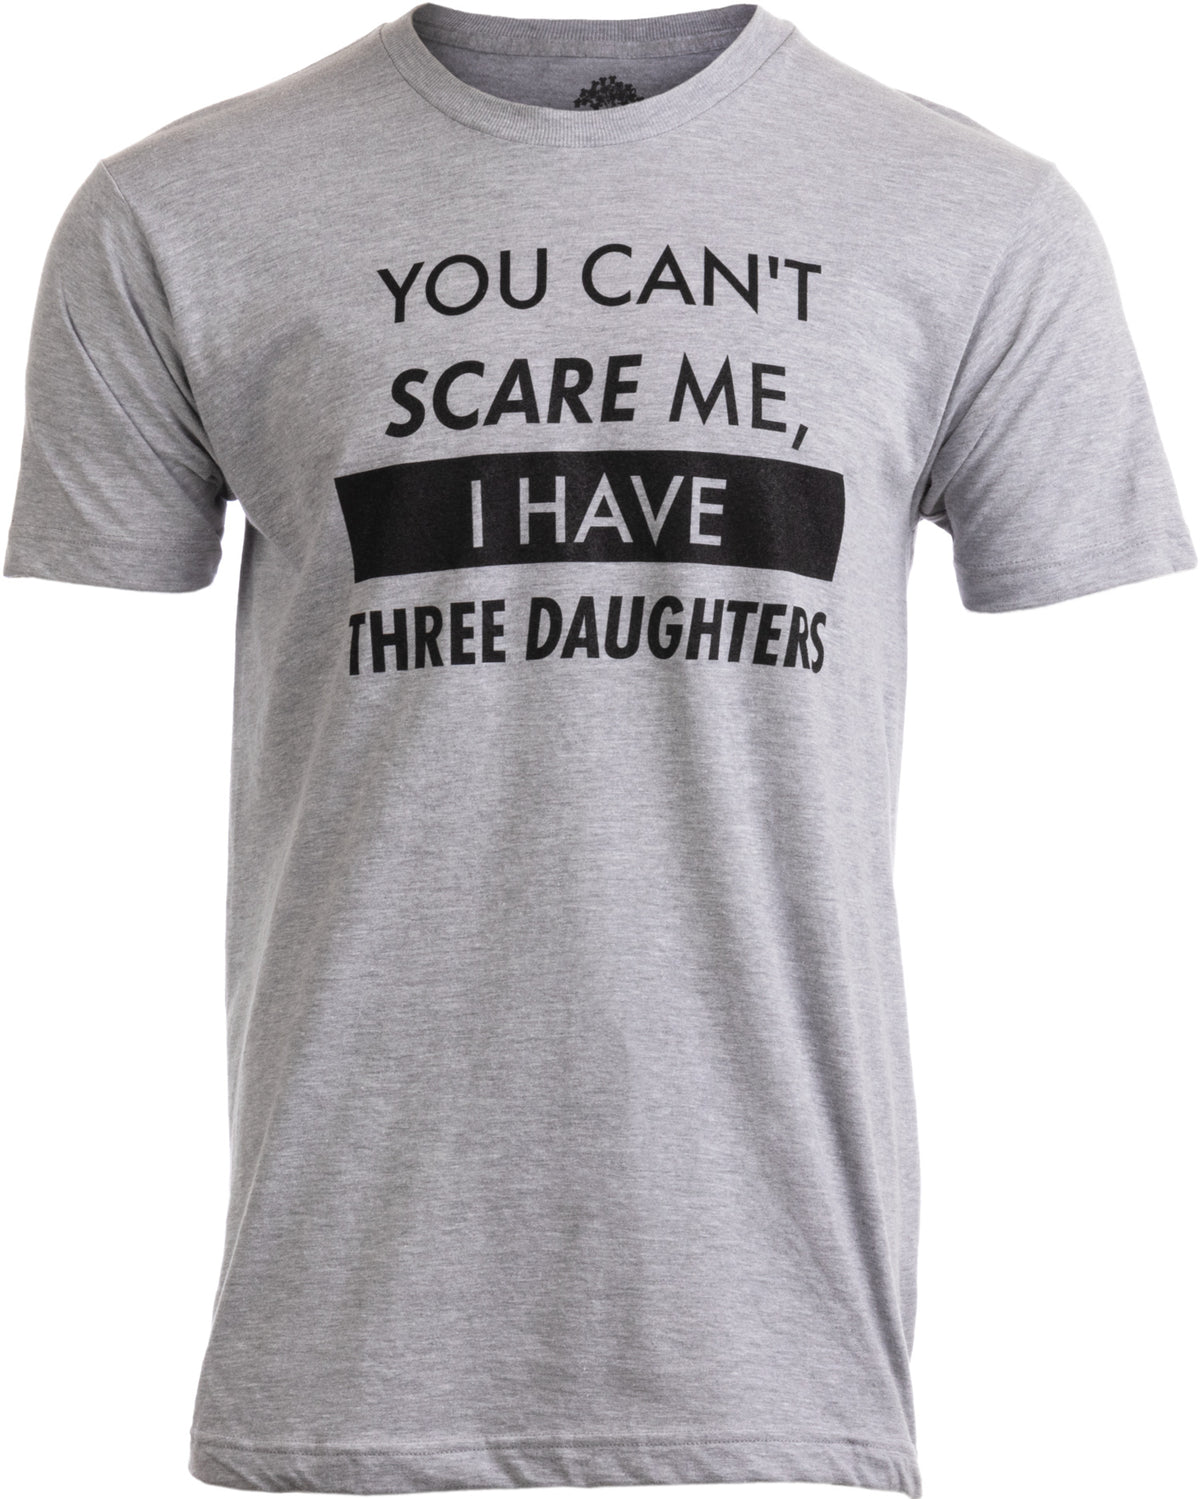 "You Can't Scare Me, I have Three Daughters" - Funny Dad Joke T-shirt - Men's/Unisex